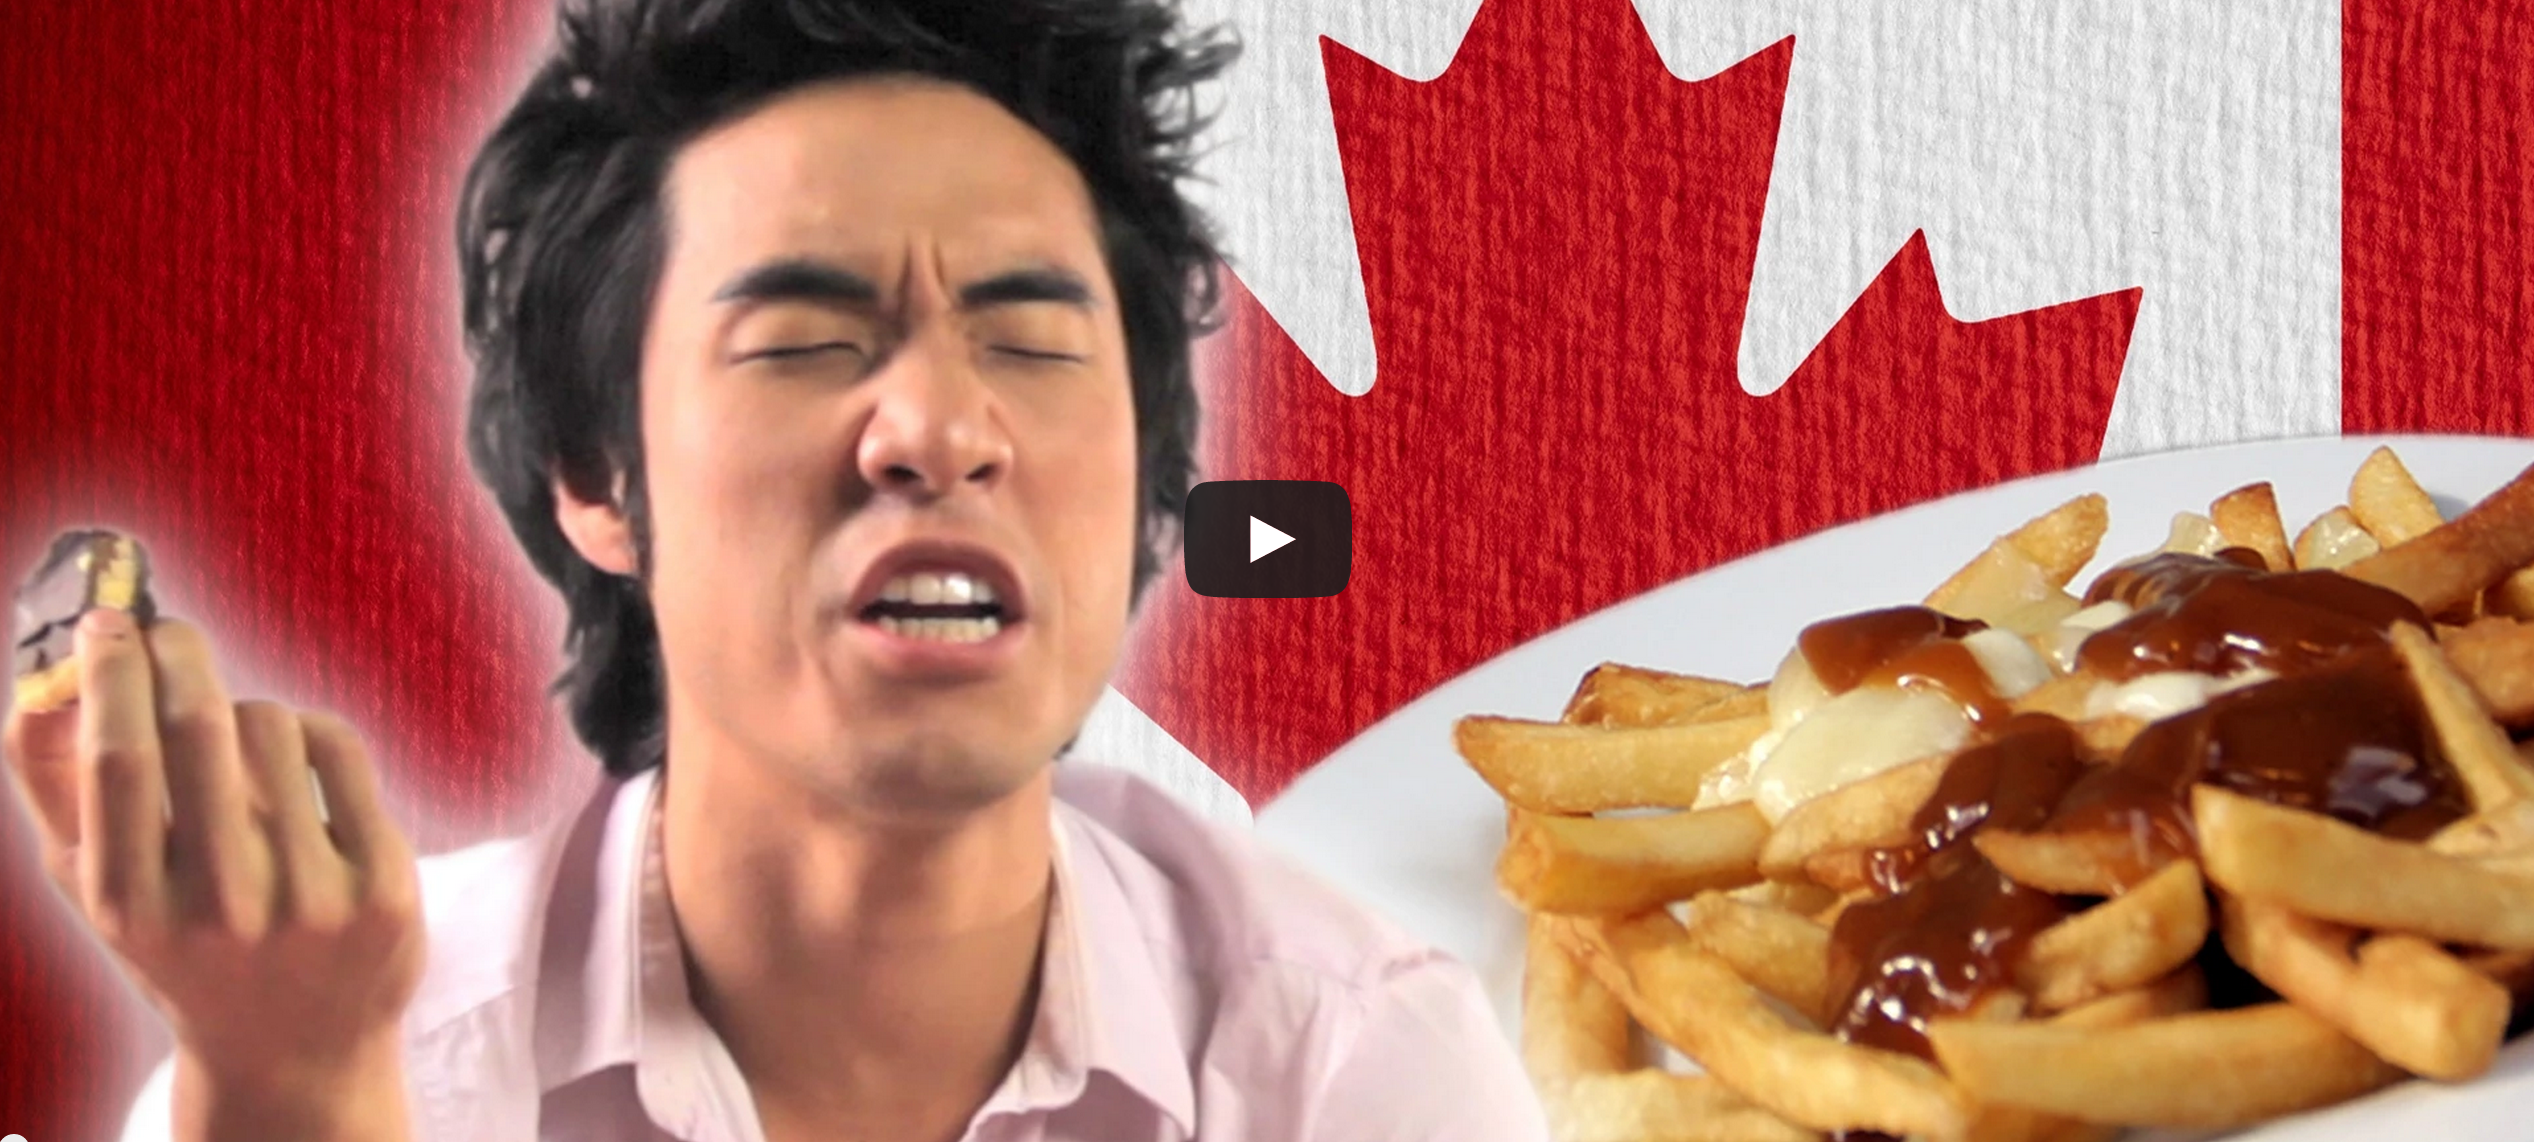 Americans trying canadian food